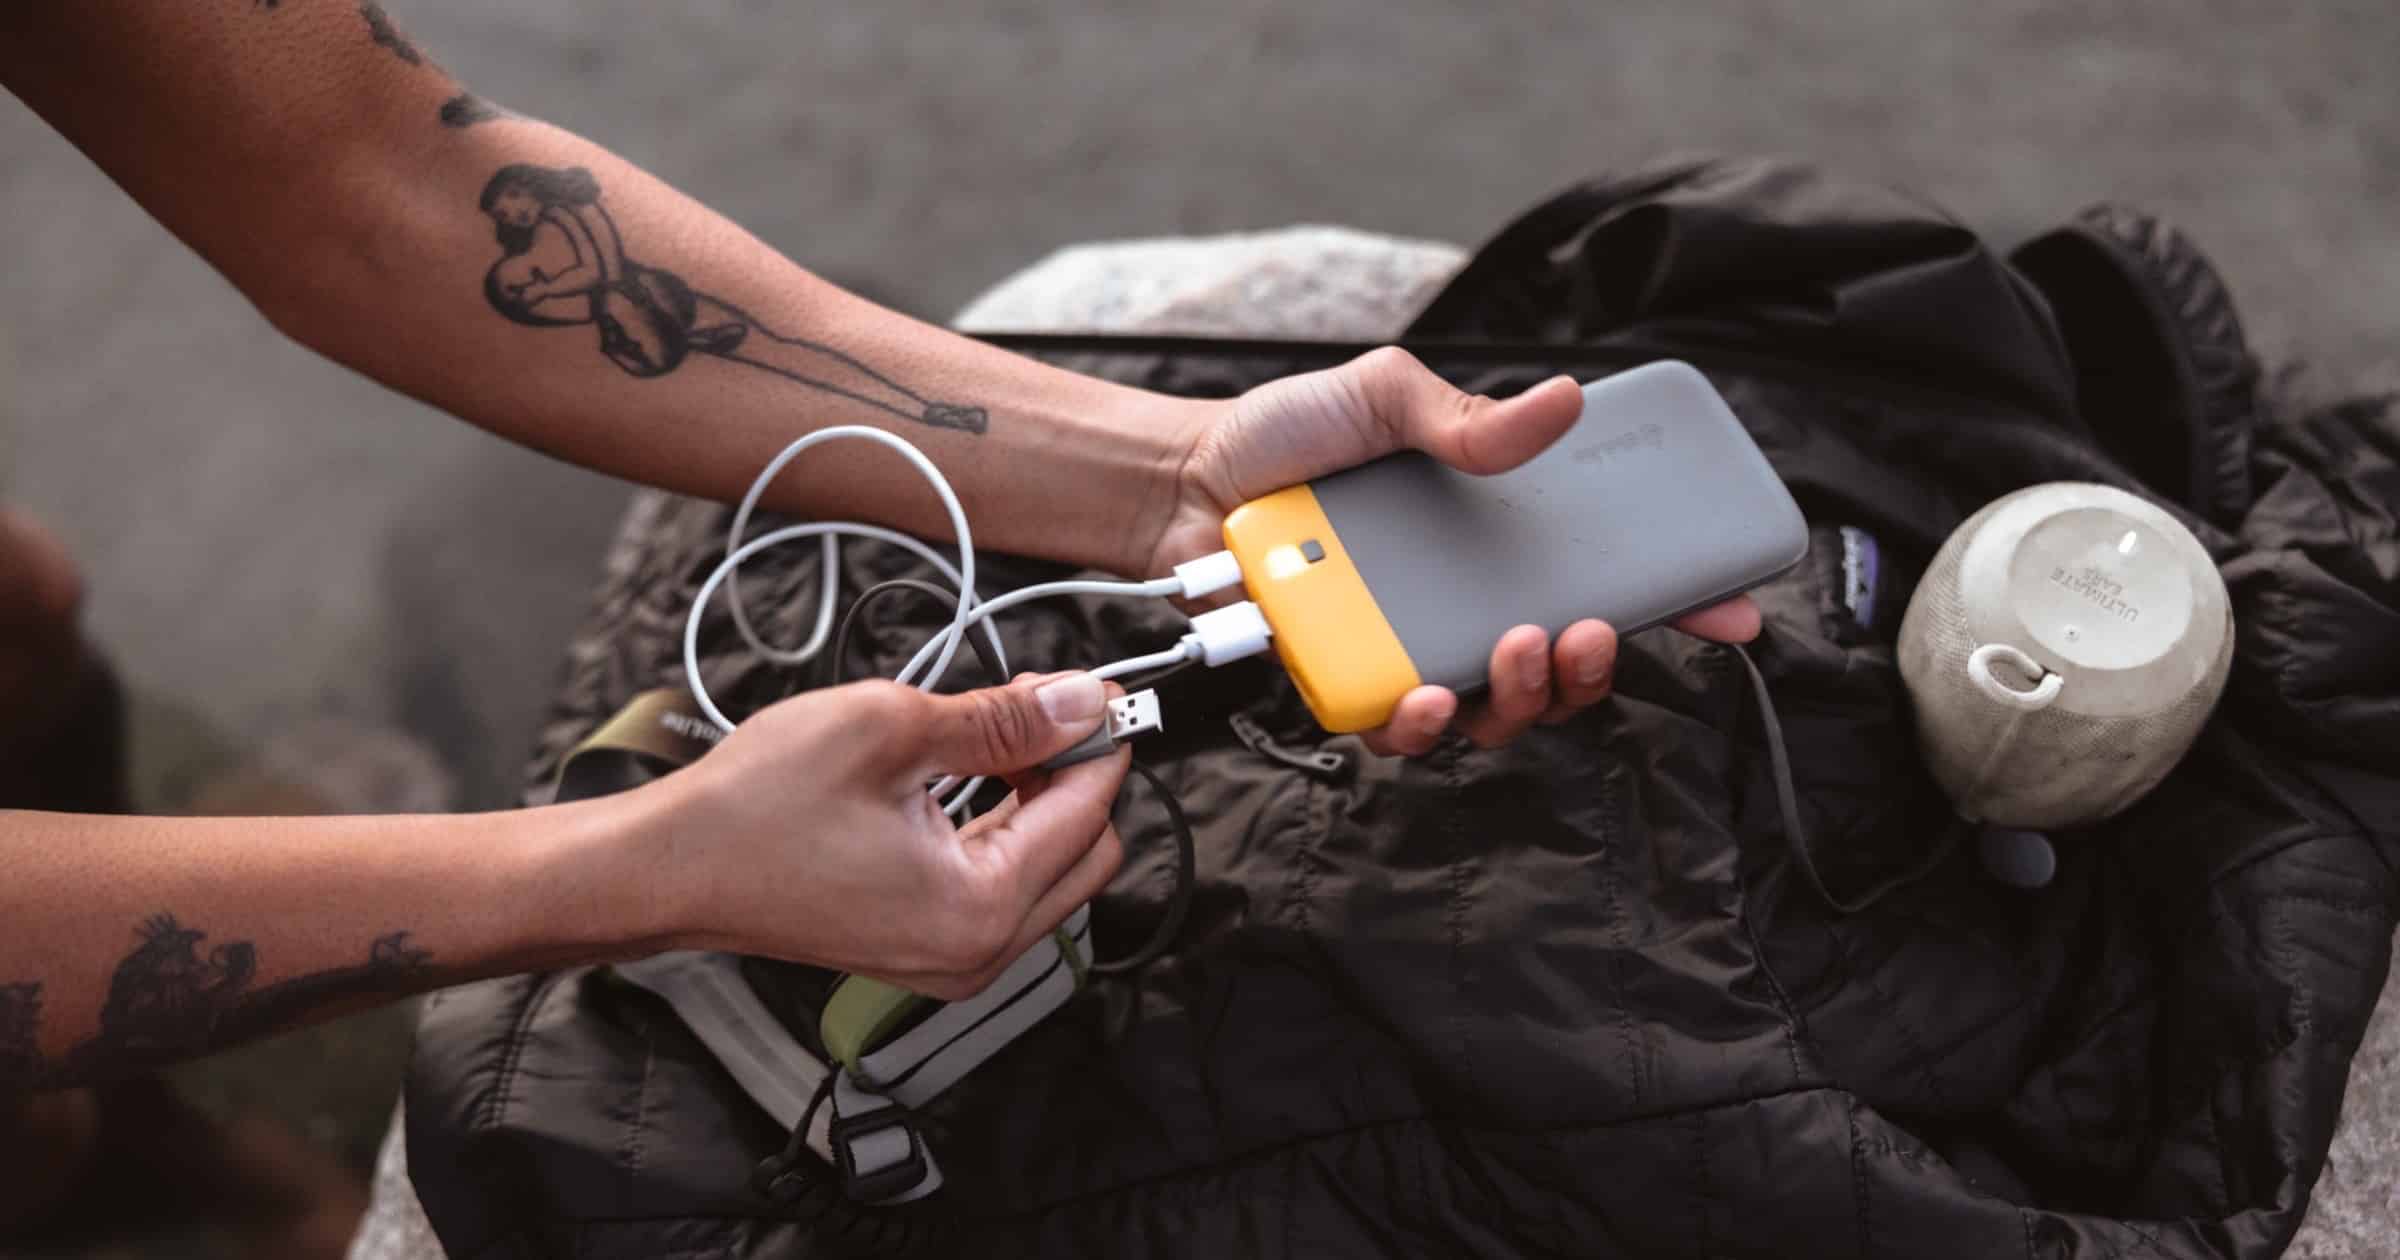 BioLite Introduces its Charge PD Powerbank Series